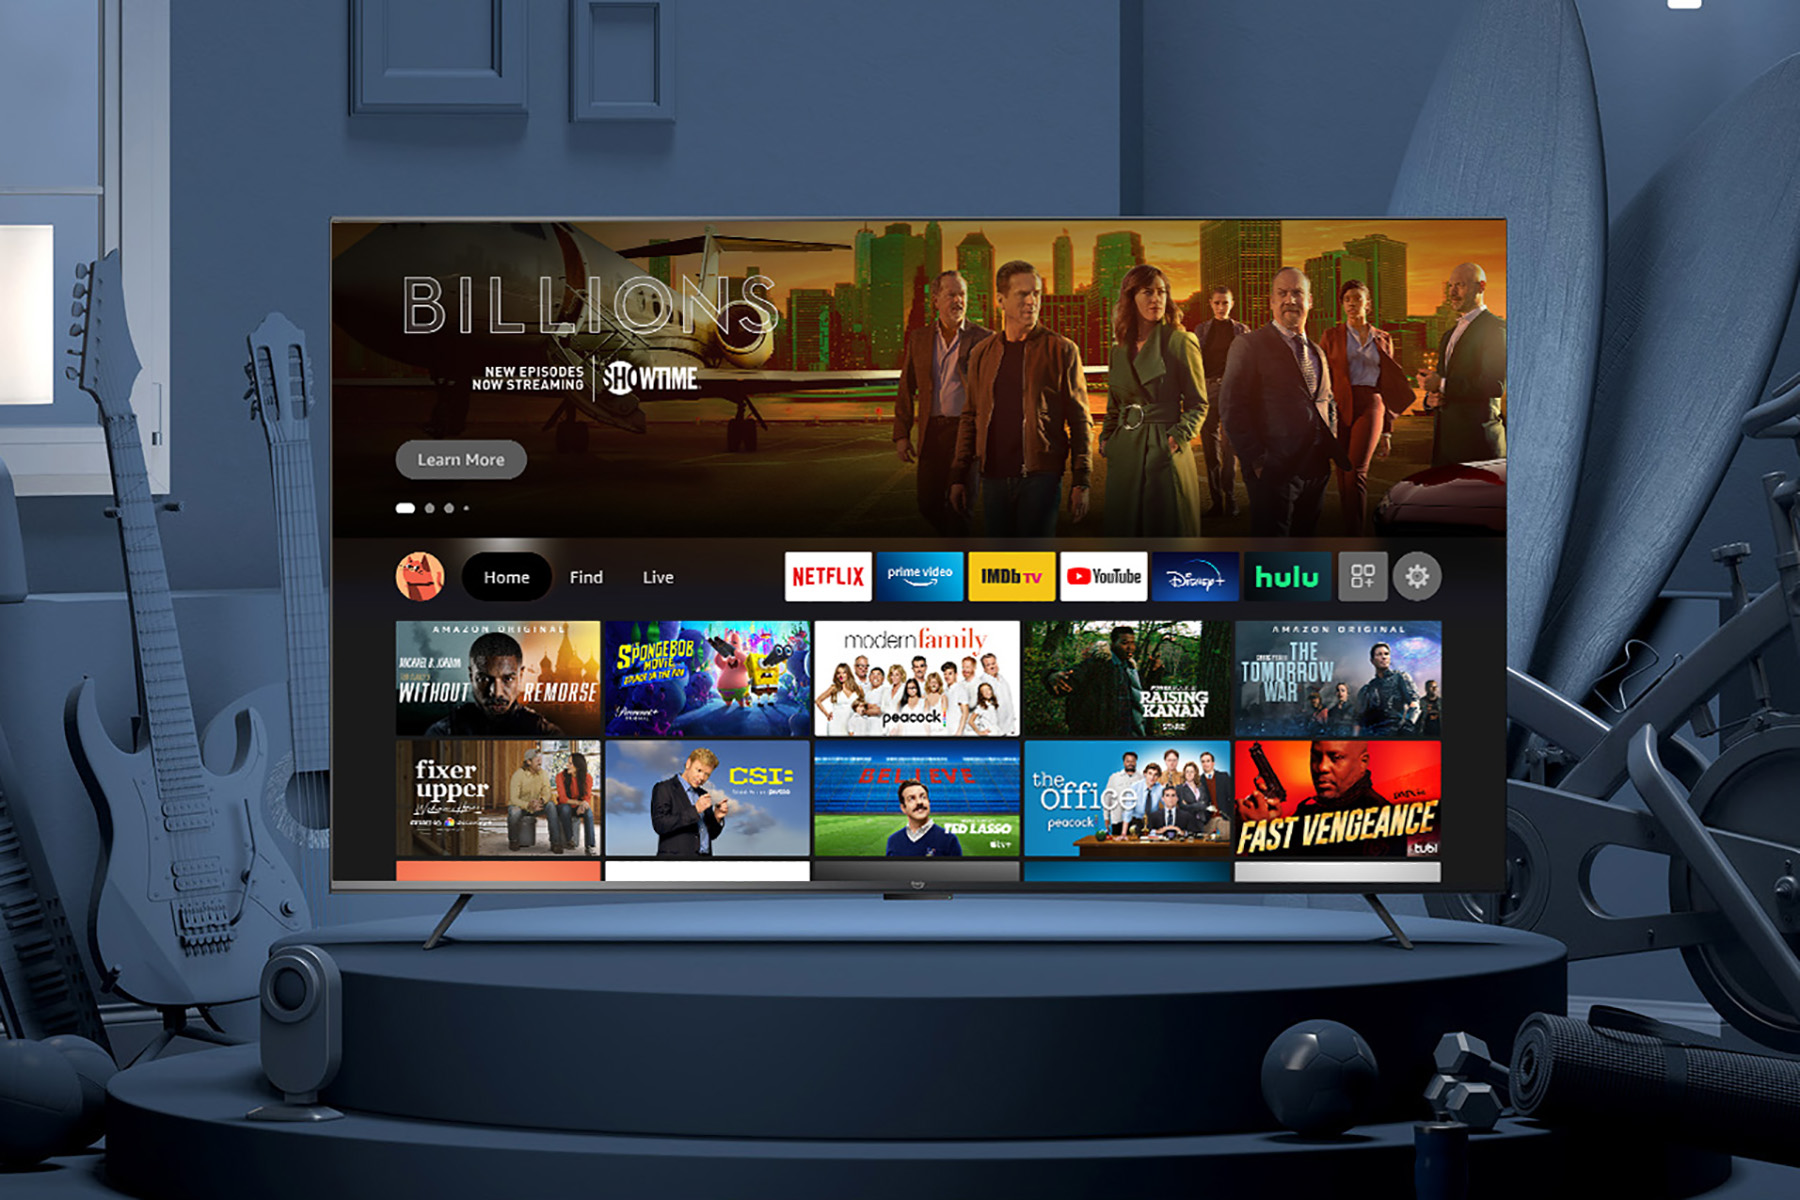 affjedring stabil ustabil How to watch Amazon Prime Video on your Chromecast | Digital Trends